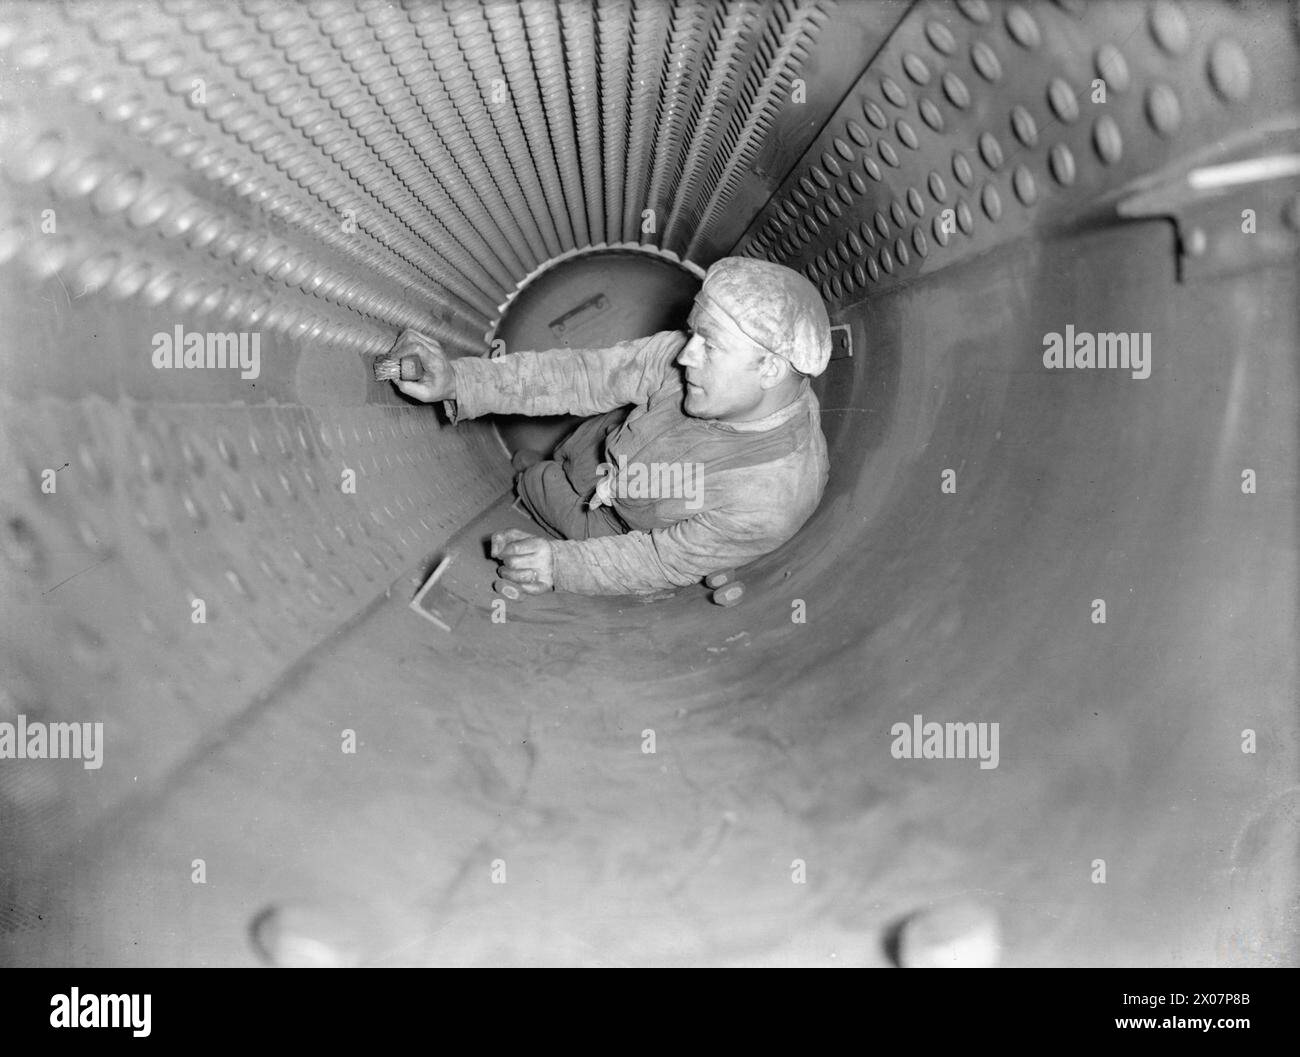 THE ROYAL NAVY DURING THE SECOND WORLD WAR - A stoker cleaning inside the boiler of the cruiser HMS CURACOA at Rosyth. The inside of the boiler is 4 feet in diameter and 12 feet long  Royal Navy, CURAÇAO (HMS) Stock Photo